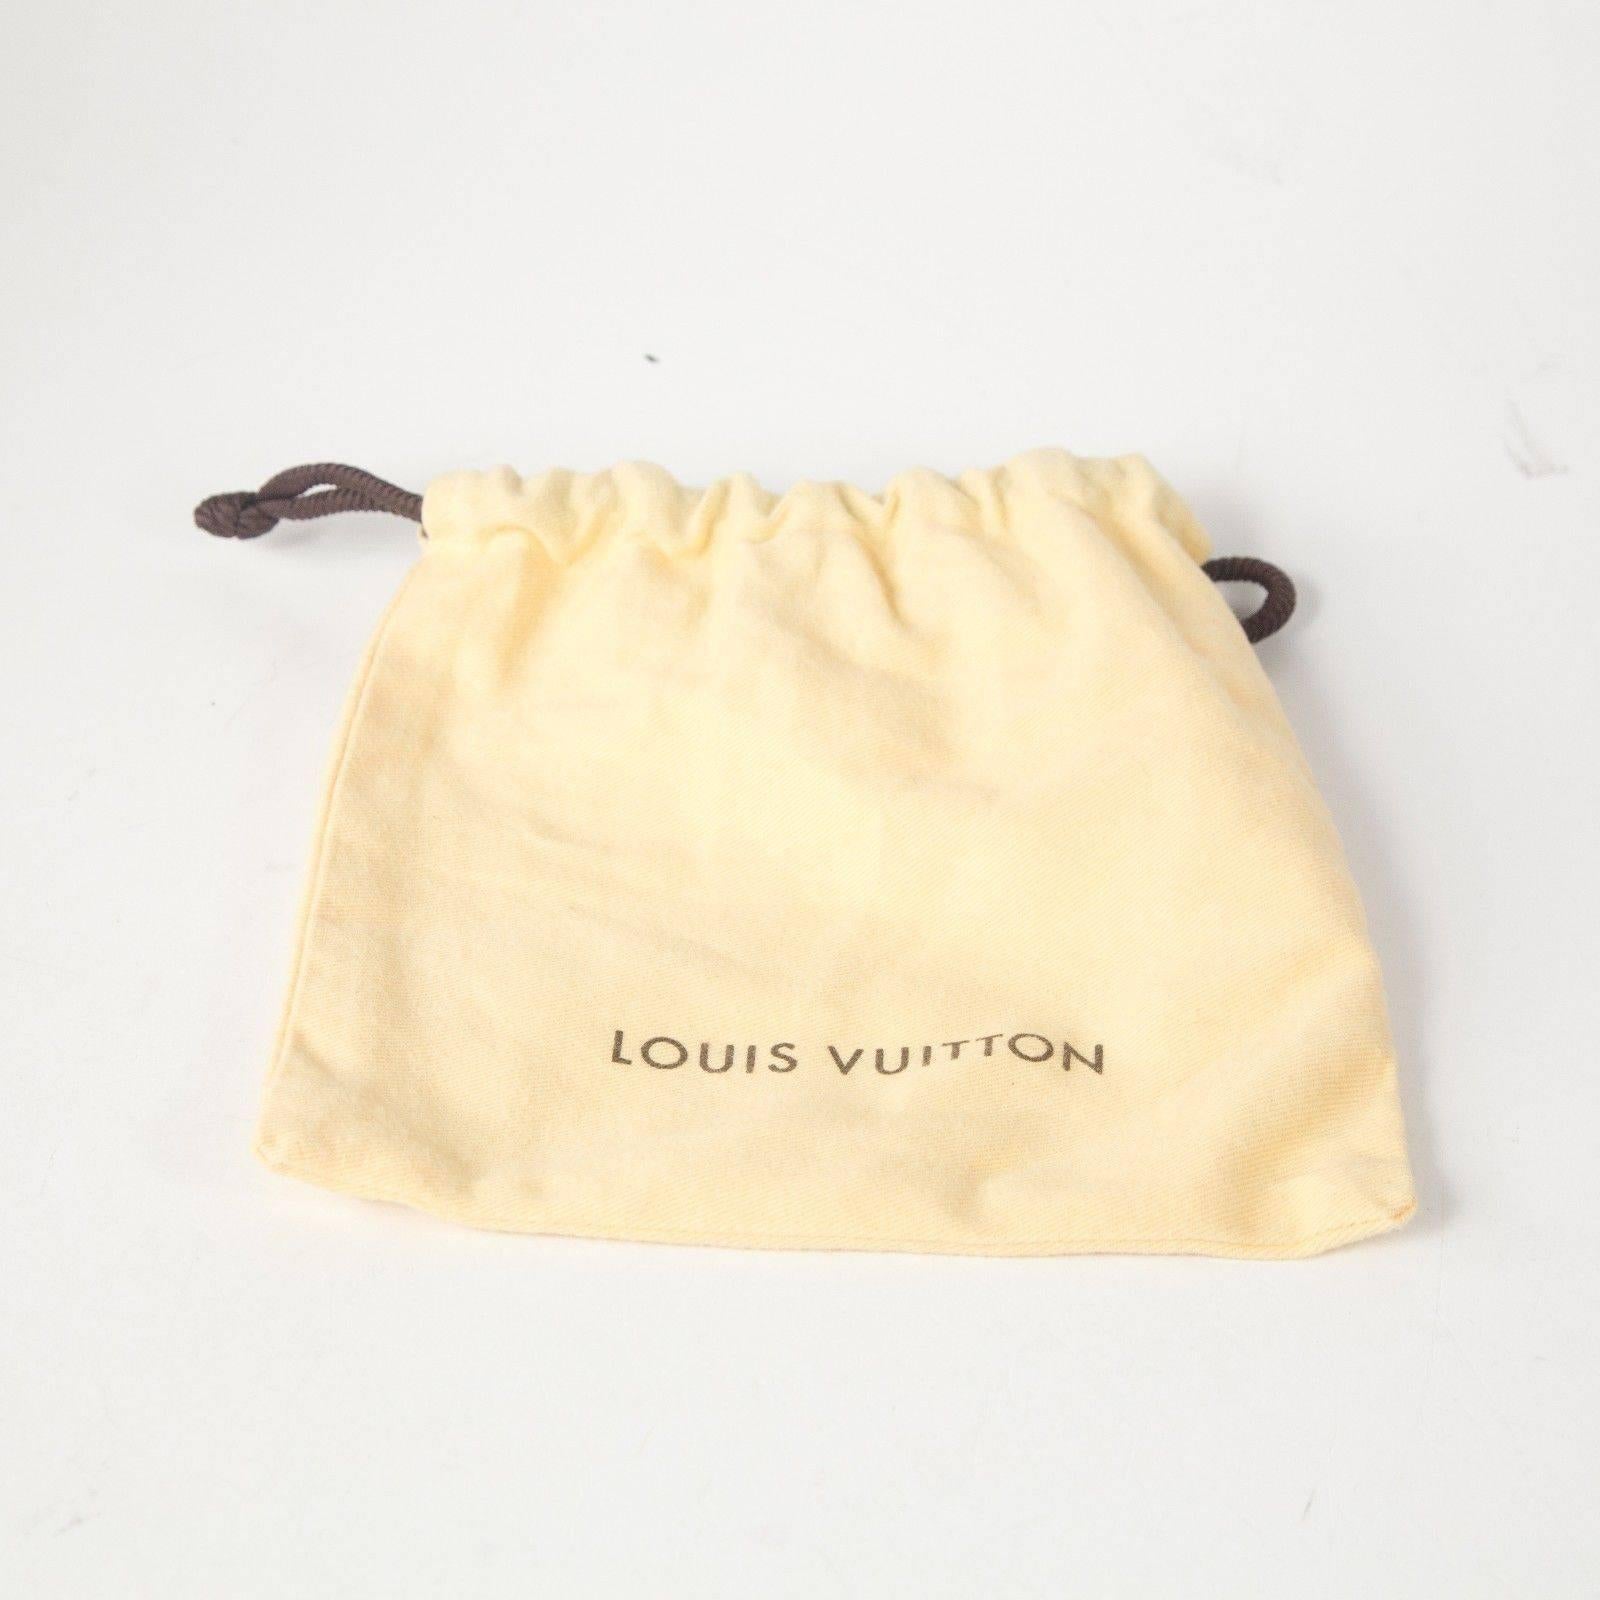 Louis Vuitton Necklace - Lock Me - Gold Studded Tan Leather Collar Choker Brown For Sale 3